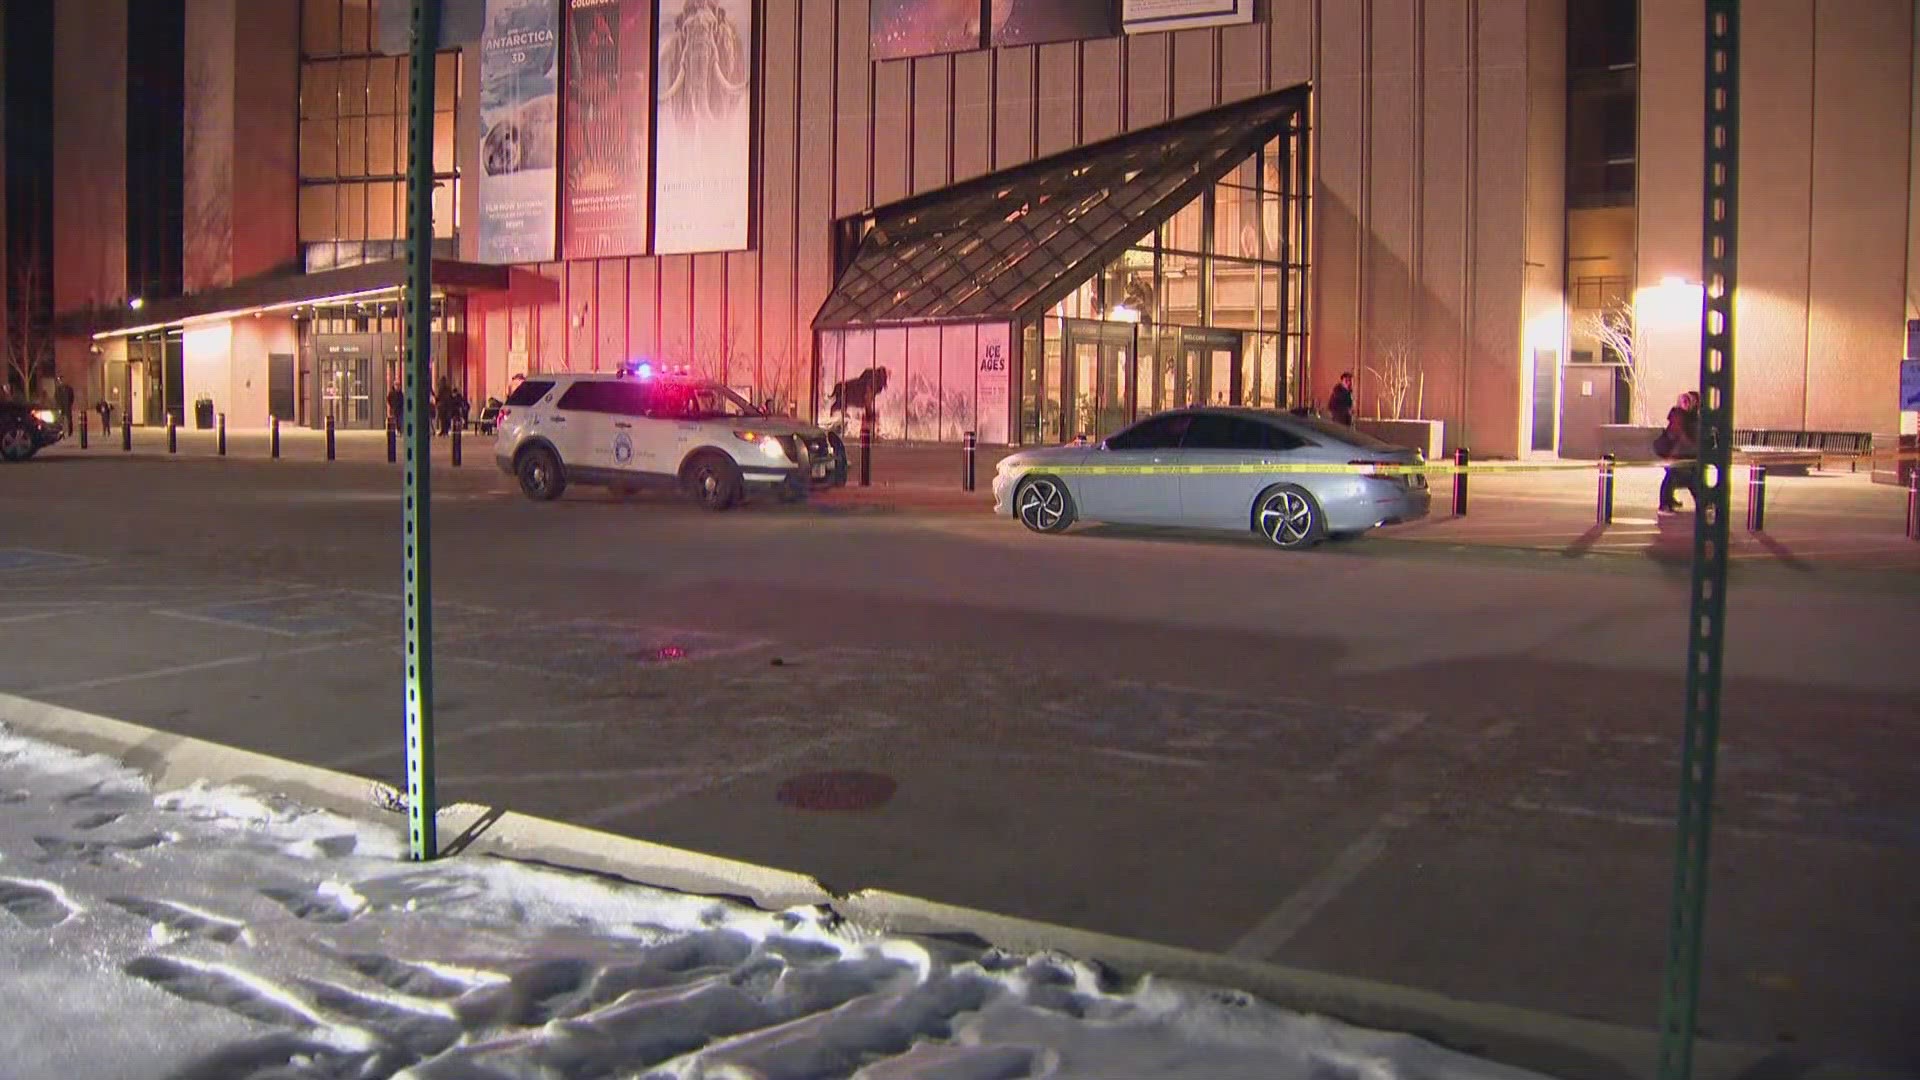 Police said the shooting happened around 2:45 p.m. in a parking lot near the Denver Museum of Nature and Science.